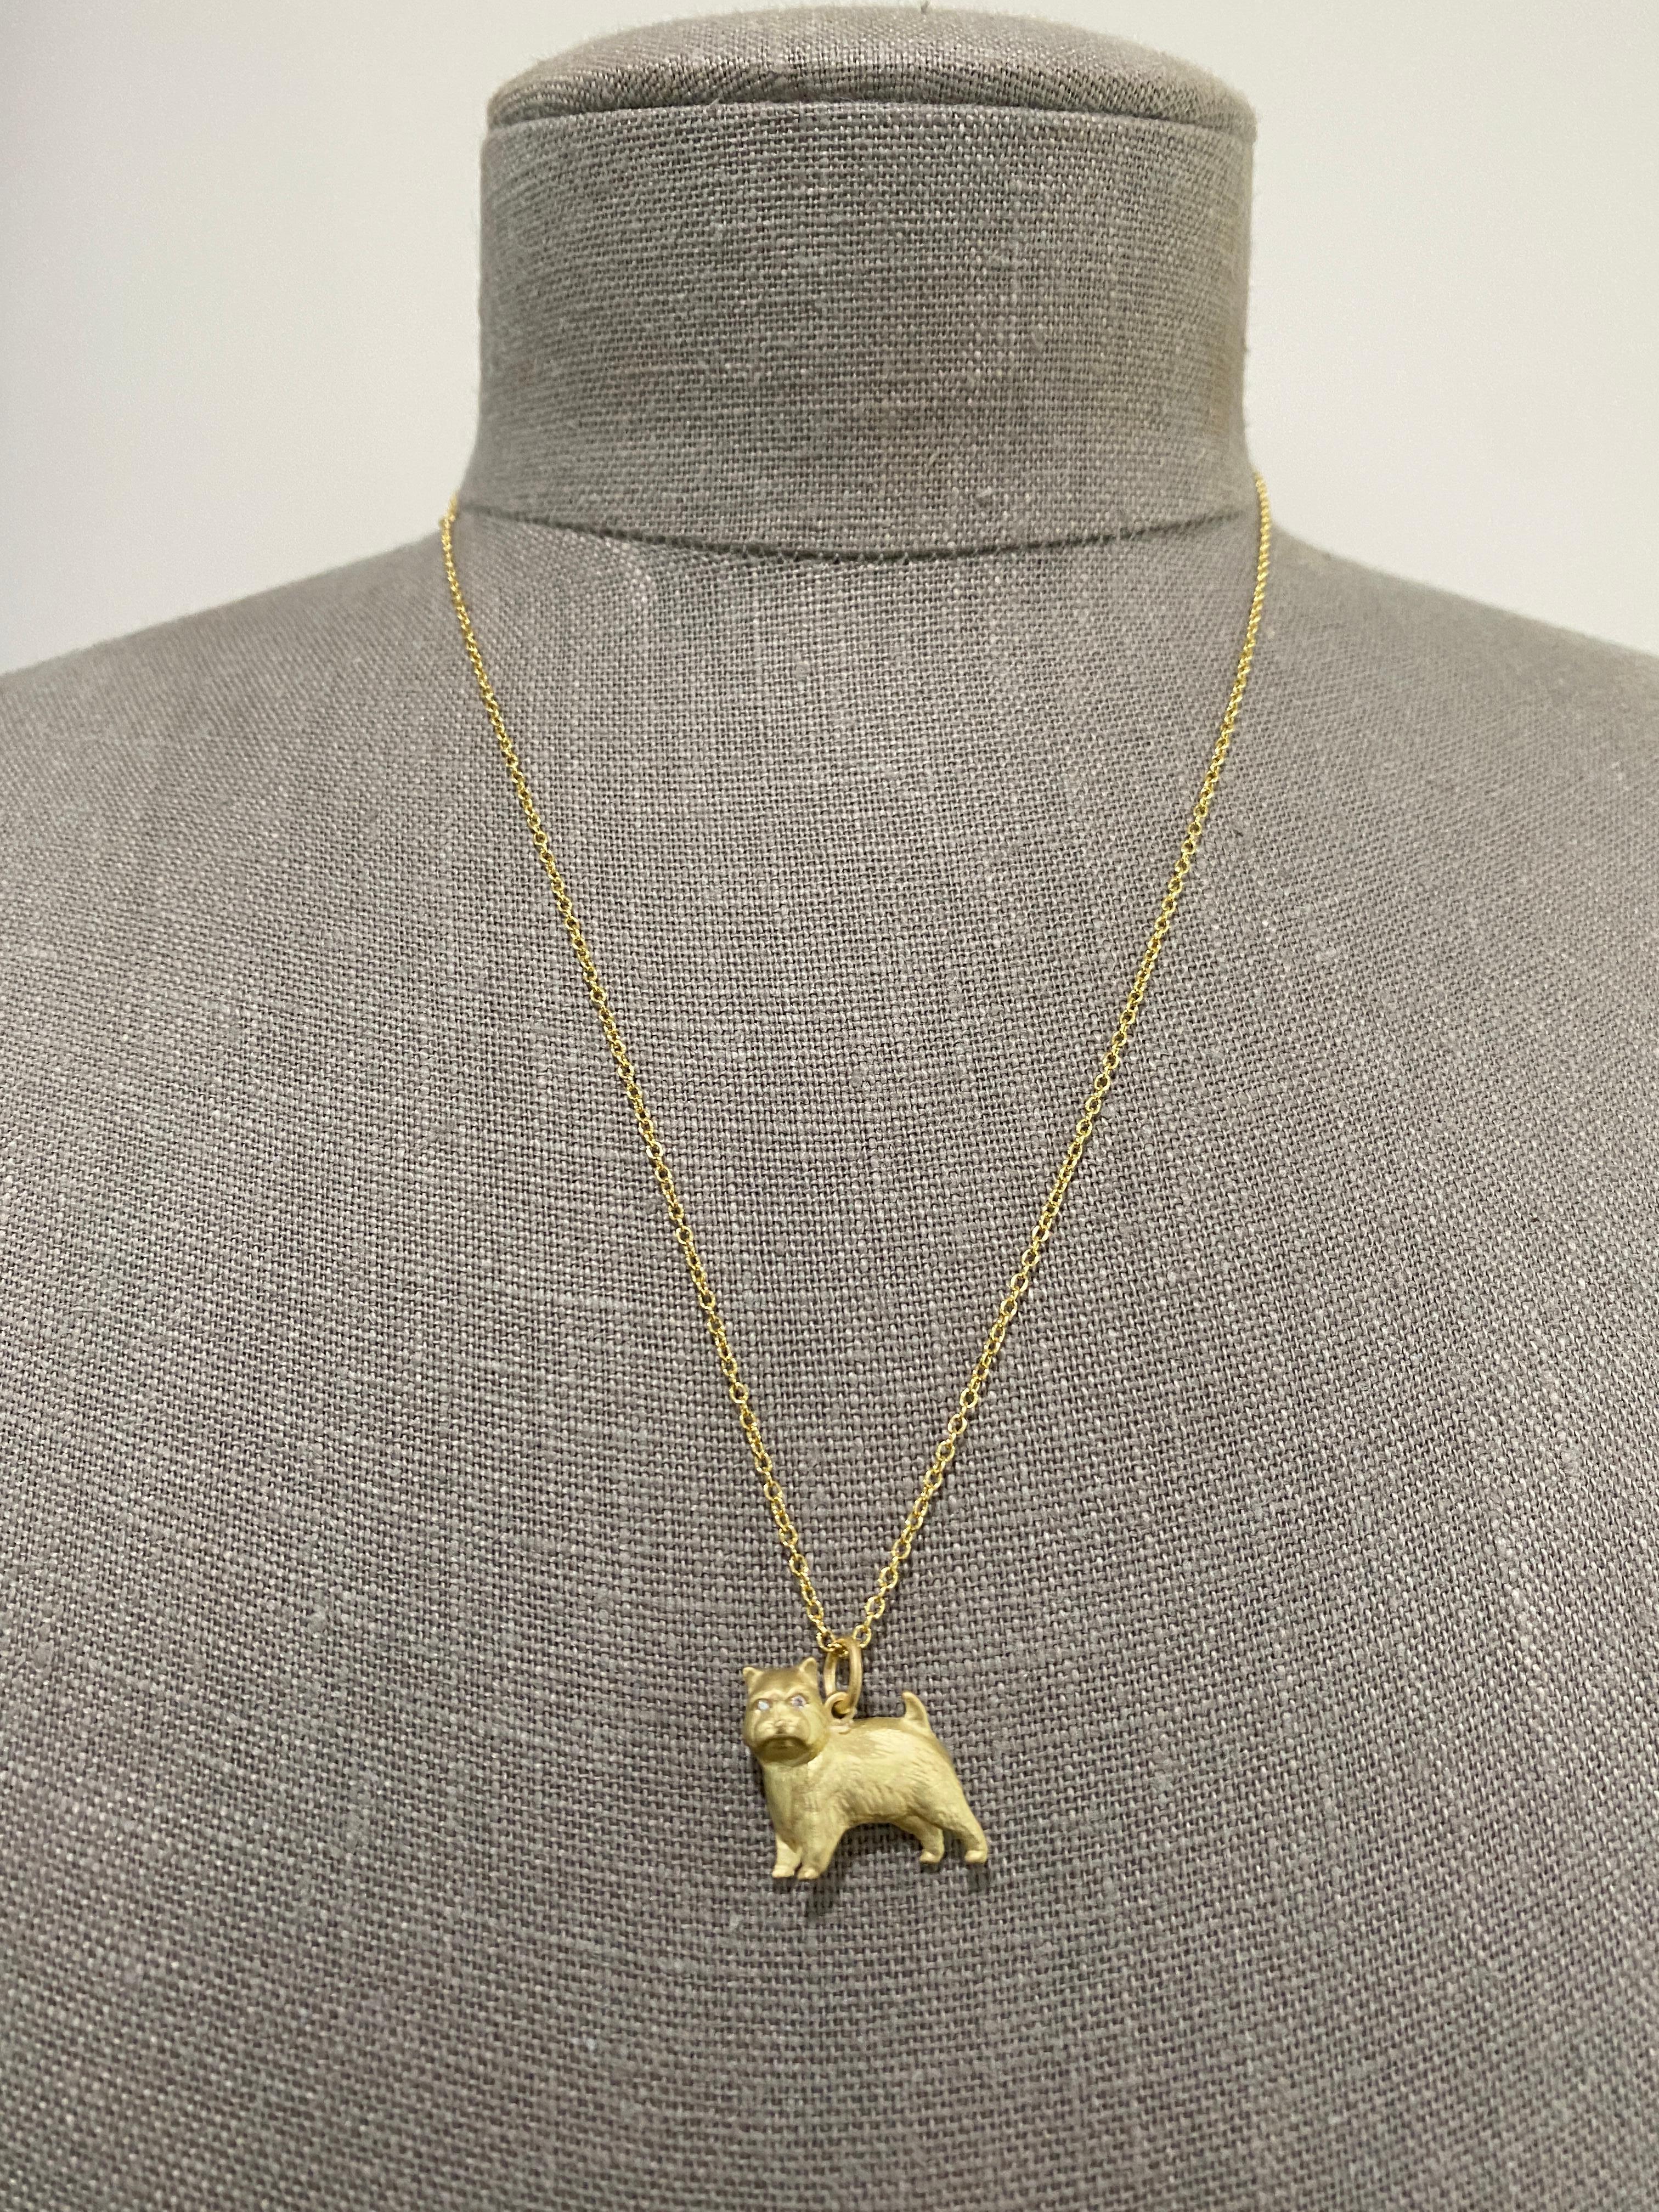 Faye Kim 18 Karat Gold Norwich Terrier Charm with Diamond Eyes In New Condition For Sale In Westport, CT